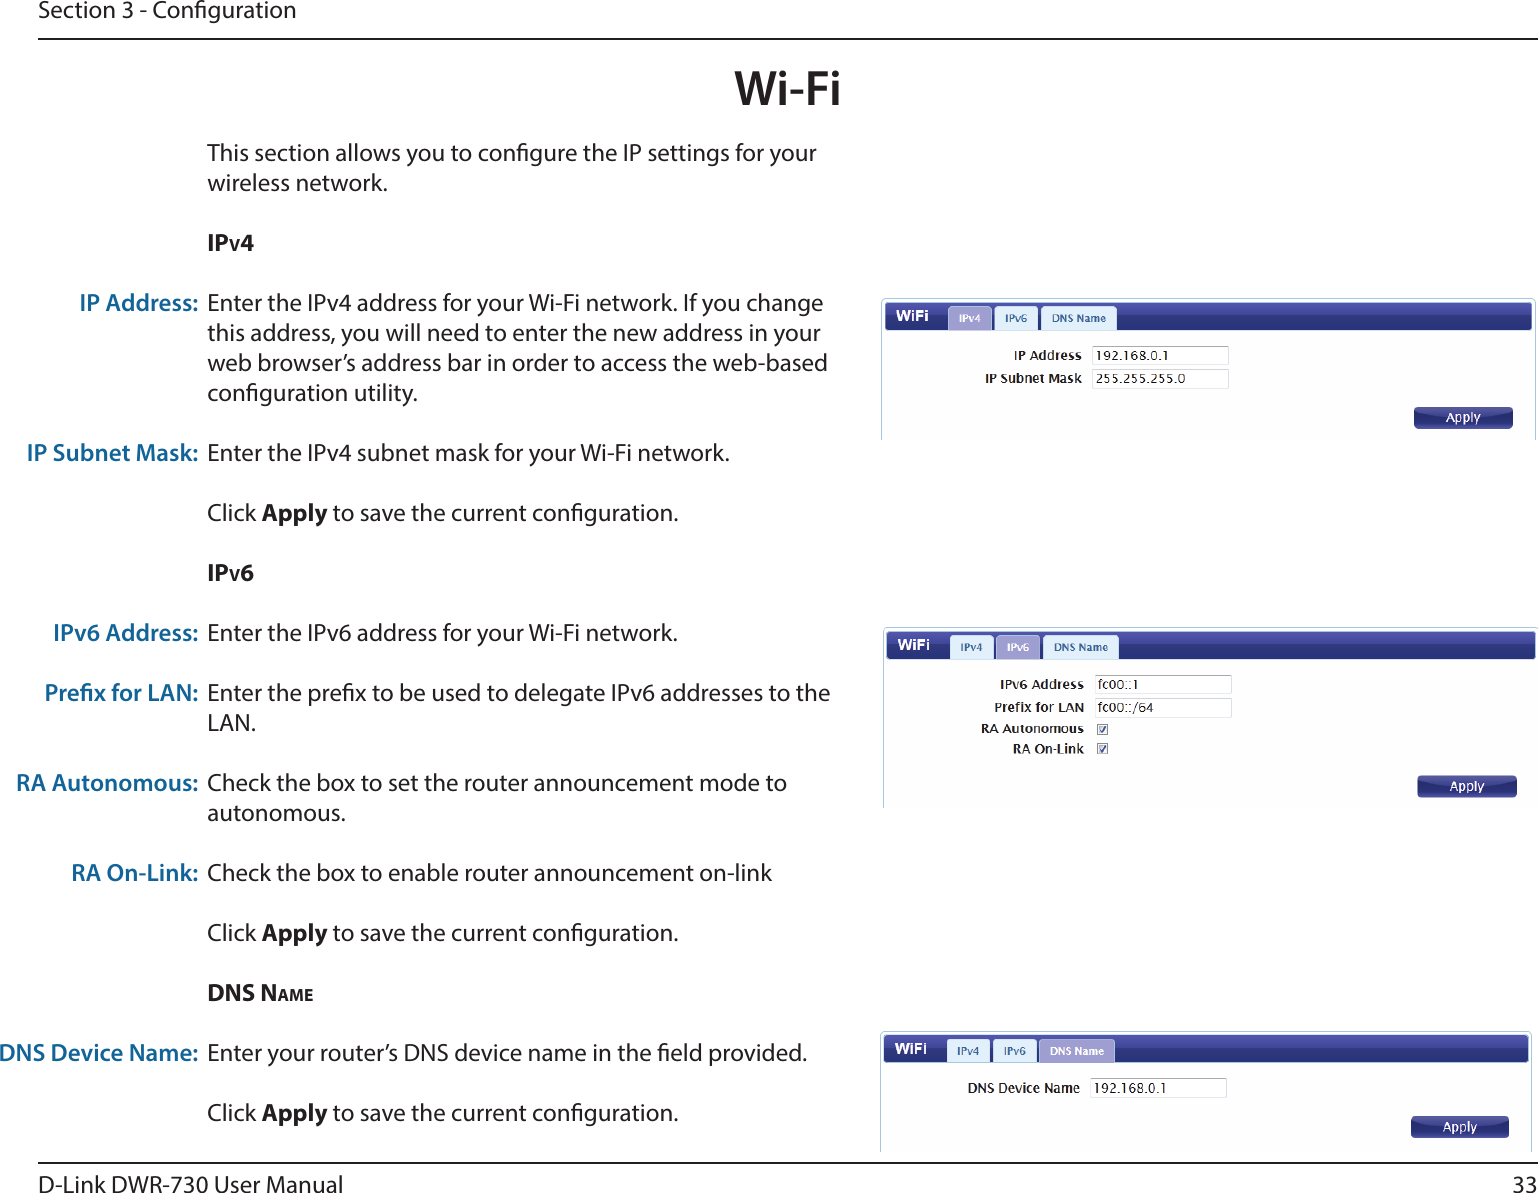 33D-Link DWR-730 User ManualSection 3 - CongurationWi-FiThis section allows you to congure the IP settings for your wireless network.ipv4Enter the IPv4 address for your Wi-Fi network. If you change this address, you will need to enter the new address in your web browser’s address bar in order to access the web-based conguration utility. Enter the IPv4 subnet mask for your Wi-Fi network. Click Apply to save the current conguration. ipv6Enter the IPv6 address for your Wi-Fi network.Enter the prex to be used to delegate IPv6 addresses to the LAN.Check the box to set the router announcement mode to autonomous.Check the box to enable router announcement on-linkClick Apply to save the current conguration. DNs NAmeEnter your router’s DNS device name in the eld provided. Click Apply to save the current conguration. IP Address:IP Subnet Mask:IPv6 Address:Prex for LAN:RA Autonomous:RA On-Link:DNS Device Name: